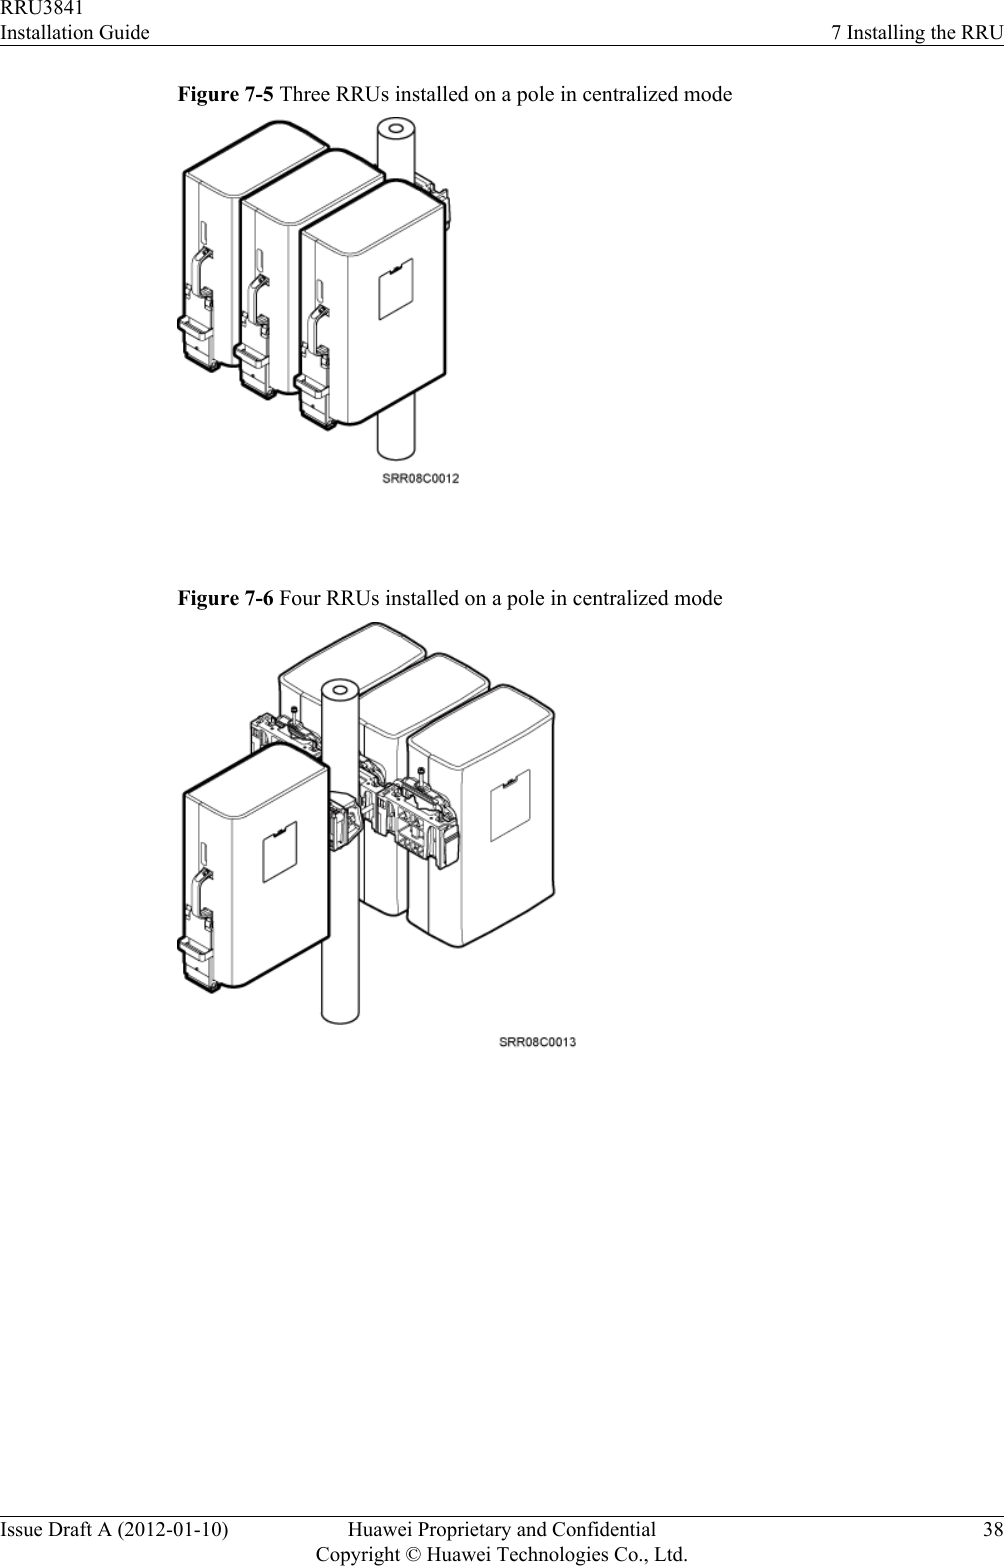 Figure 7-5 Three RRUs installed on a pole in centralized mode Figure 7-6 Four RRUs installed on a pole in centralized mode RRU3841Installation Guide 7 Installing the RRUIssue Draft A (2012-01-10) Huawei Proprietary and ConfidentialCopyright © Huawei Technologies Co., Ltd.38